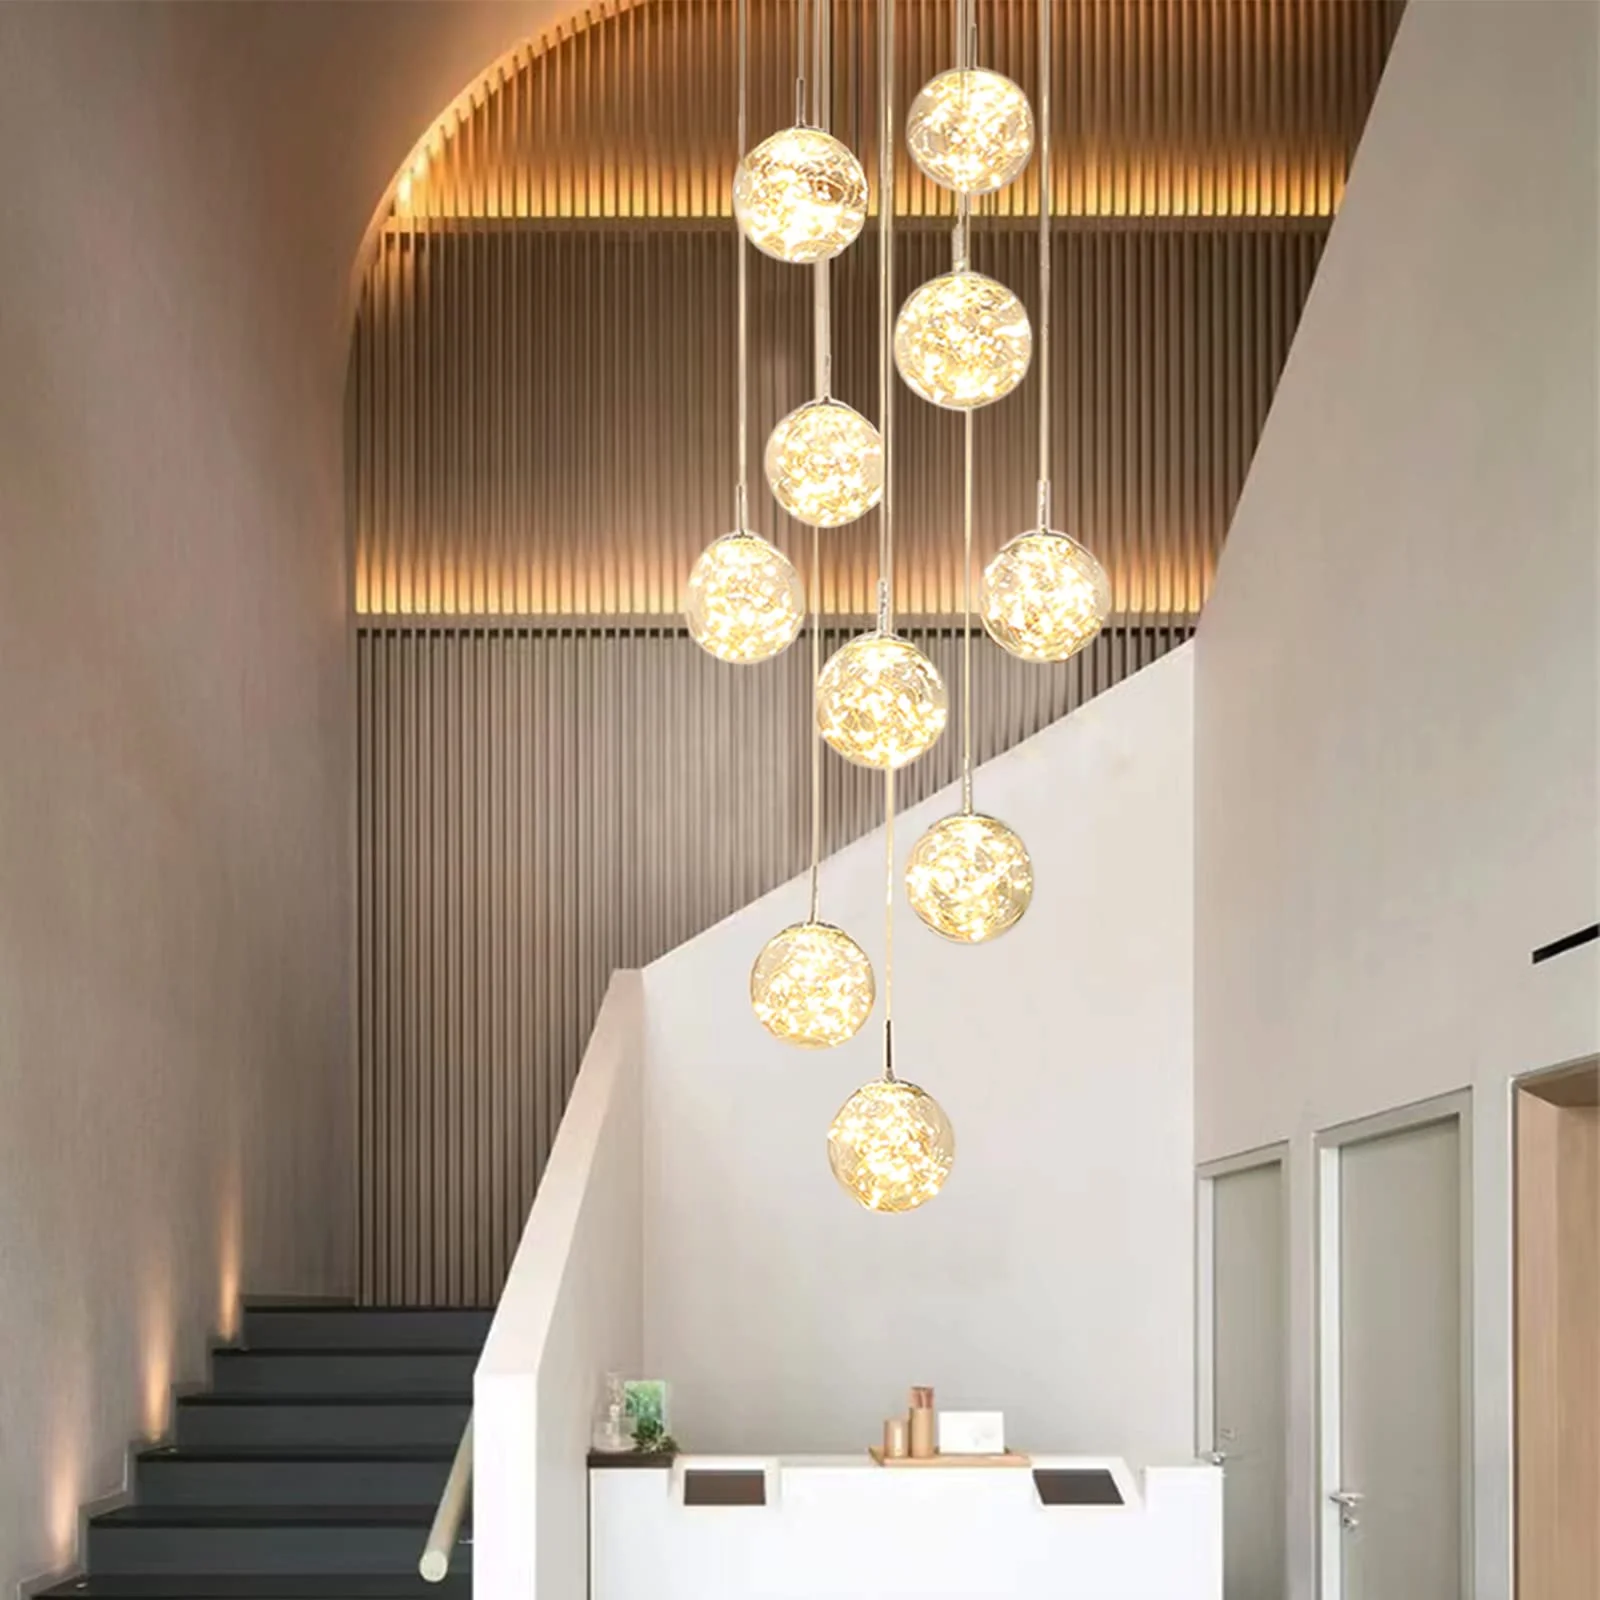 Crystal Ball Ceiling Modern Chandelier   Large Chandeliers for High Ceilings, Modern Villas and Stairs, Adjustable Length